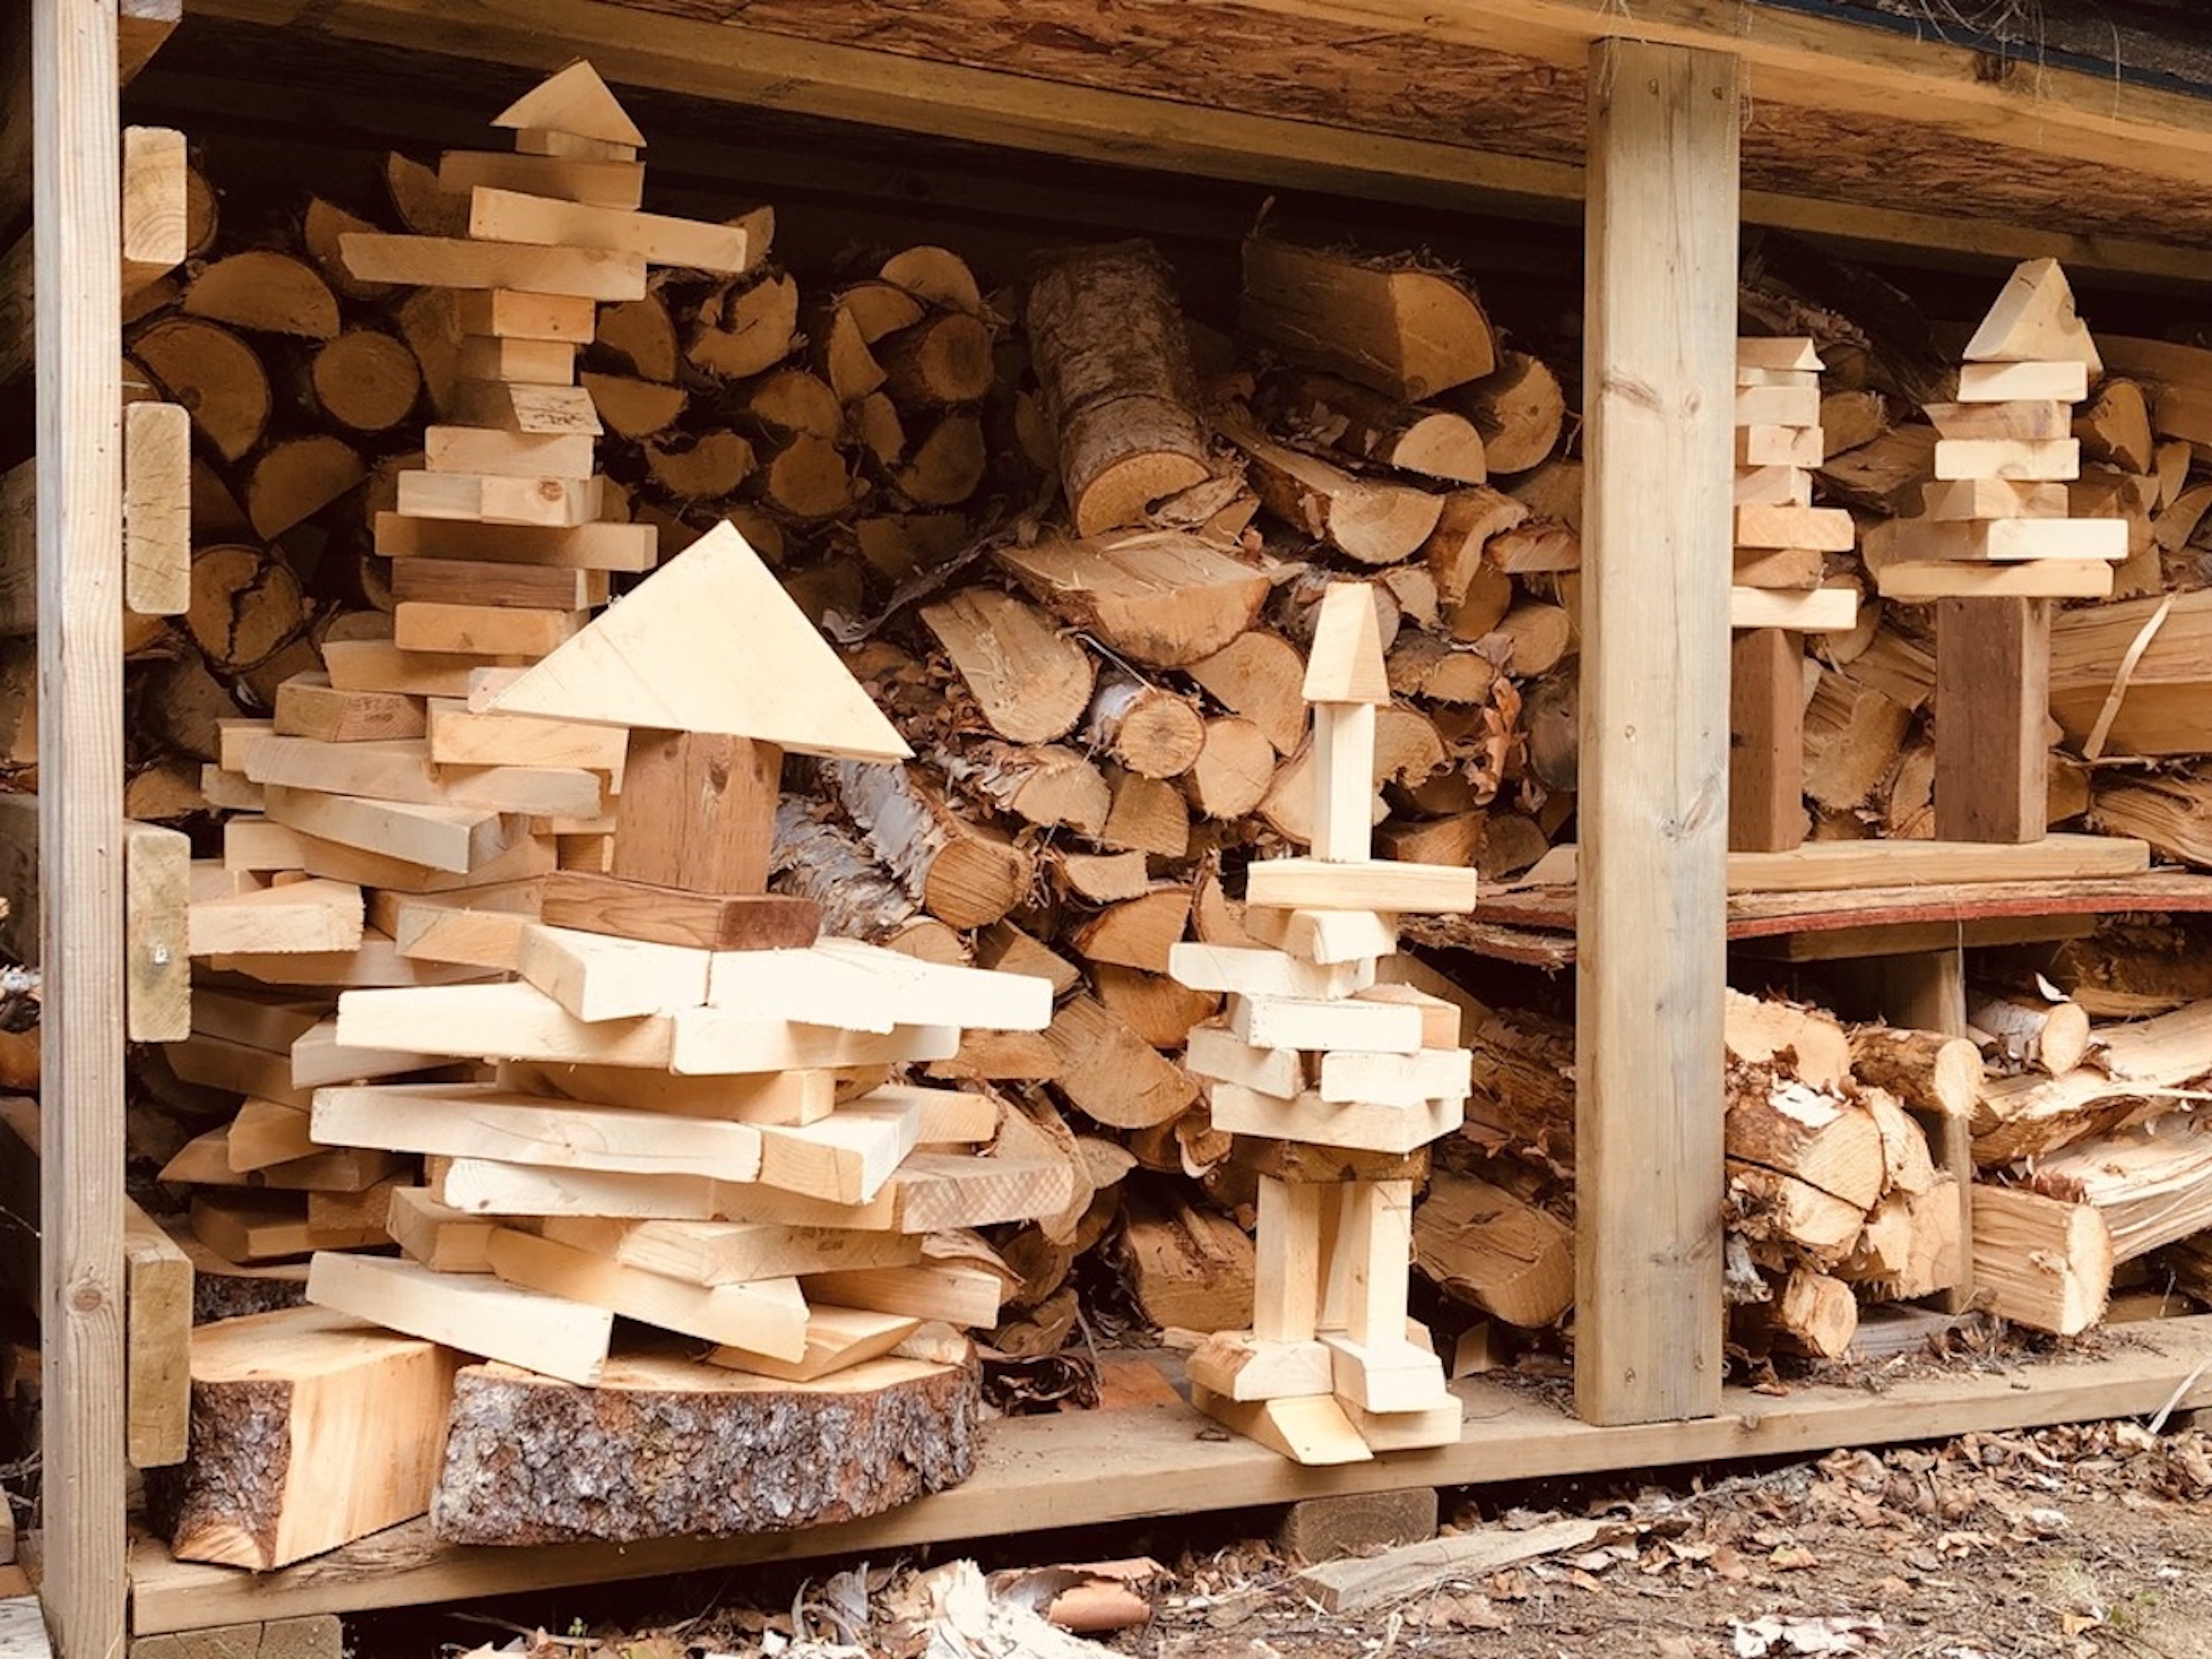 This is an image of a wood shed in which the wood cuttings have been stacked into various towers.